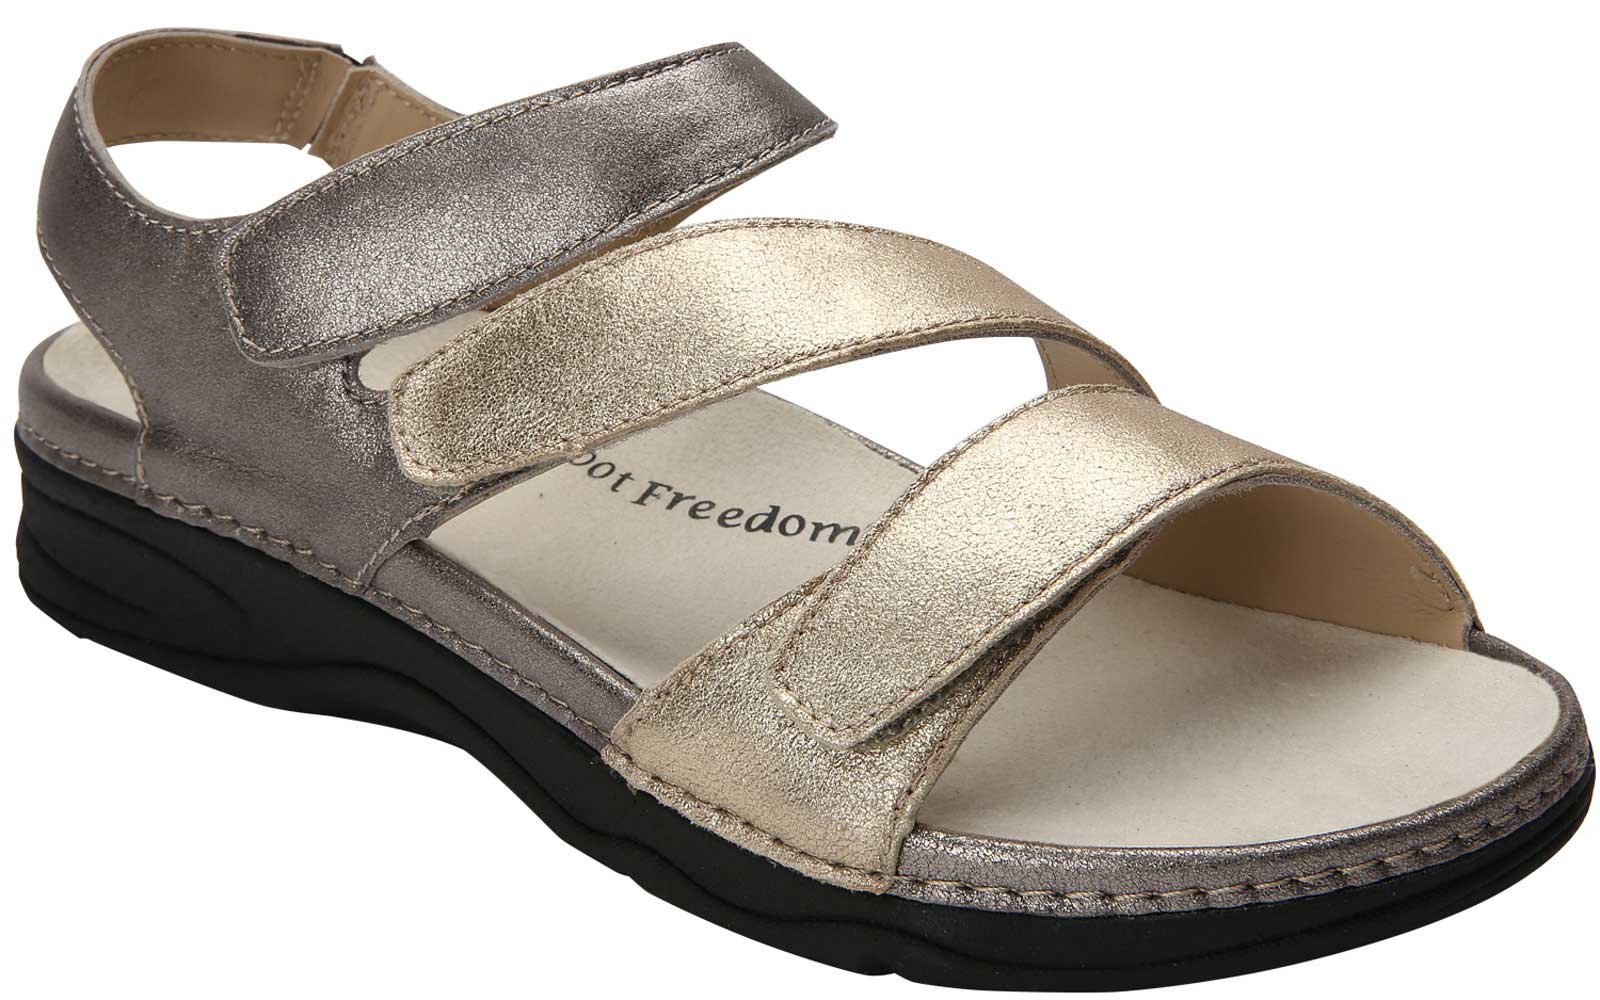 Drew Shoes Angela 17023 - Women's Sandal - Casual Comfort Orthopedic Sandal - Removable Footbeds - Extra Wide